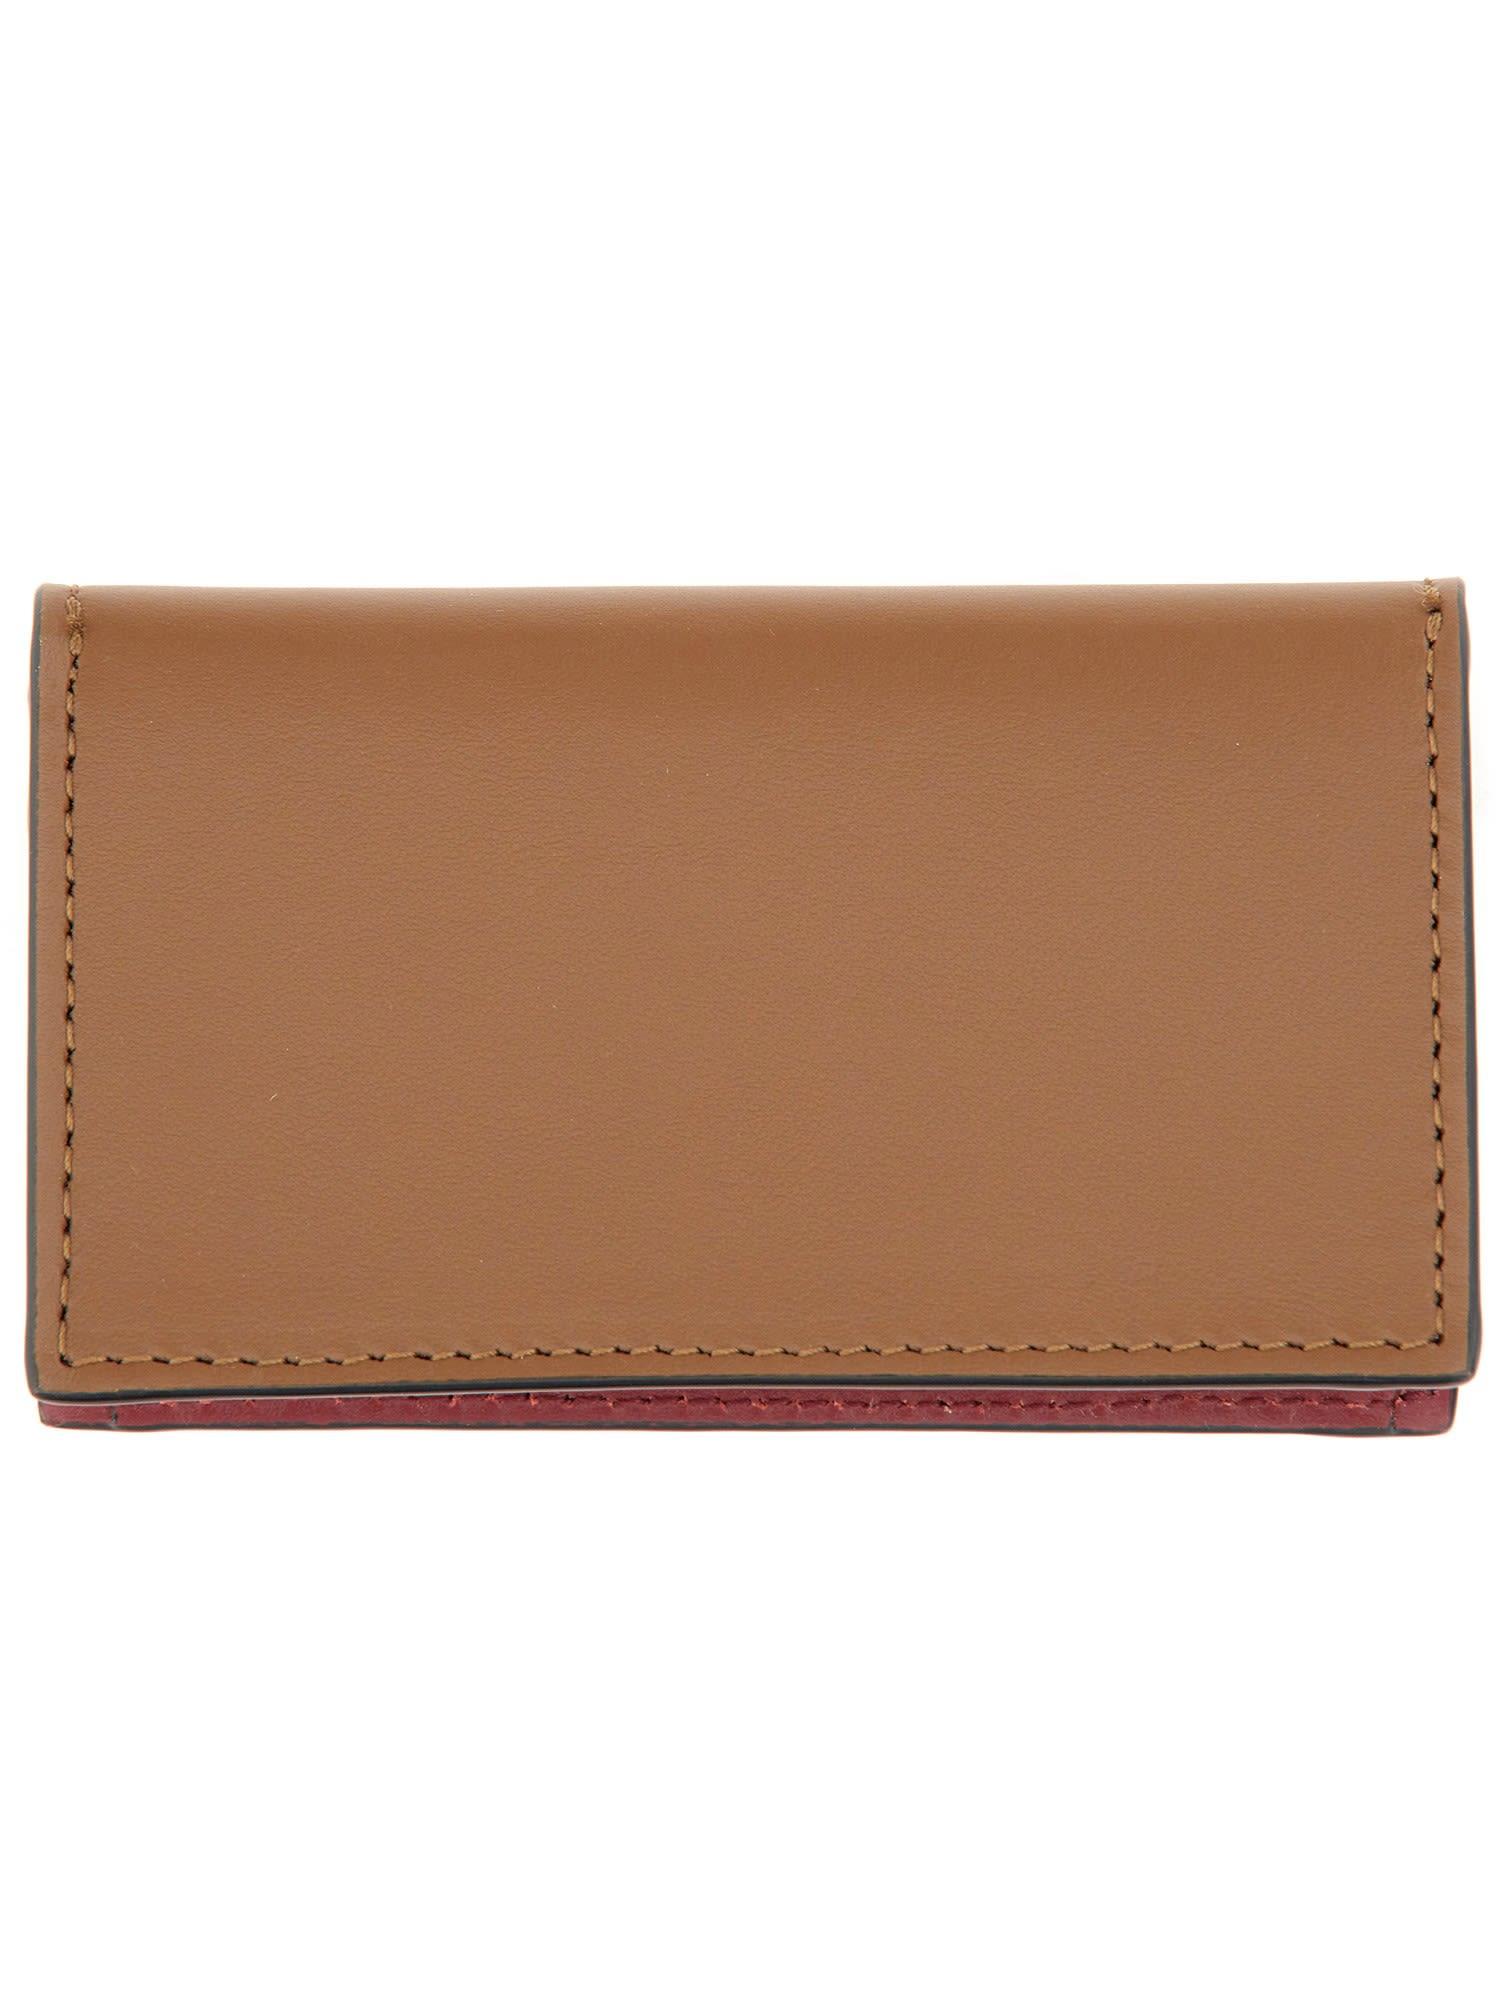 Marni Business Card Holder in Natural | Lyst